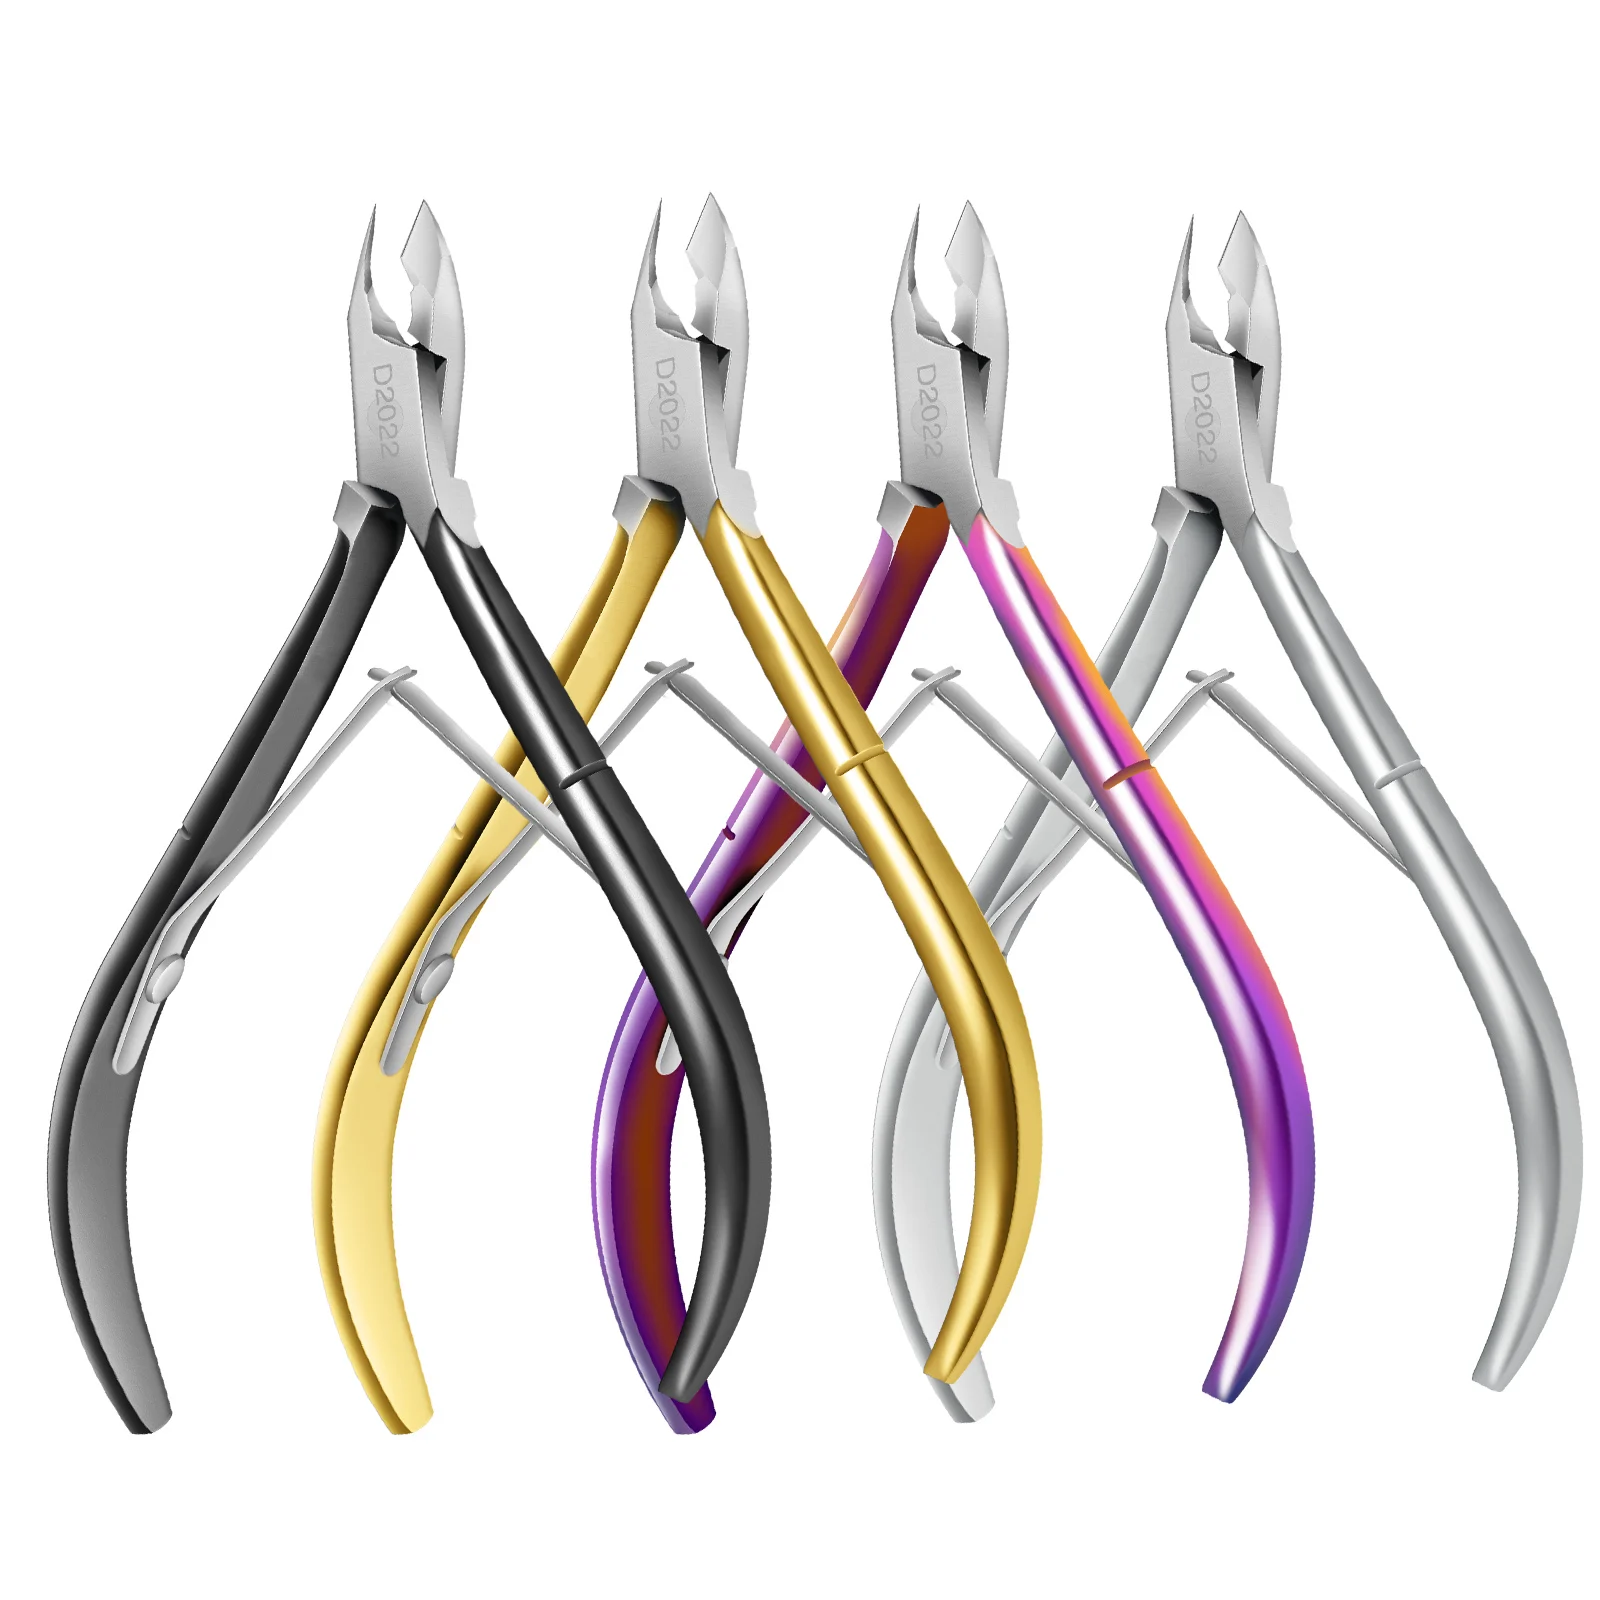 

Professional High Quality Stainless Steel Dead Skin Scissors Nail Art Clipper Trimmer Cuticle Scissor Cutter Nail Nipper Tools, Gold/silver/rainbow/black